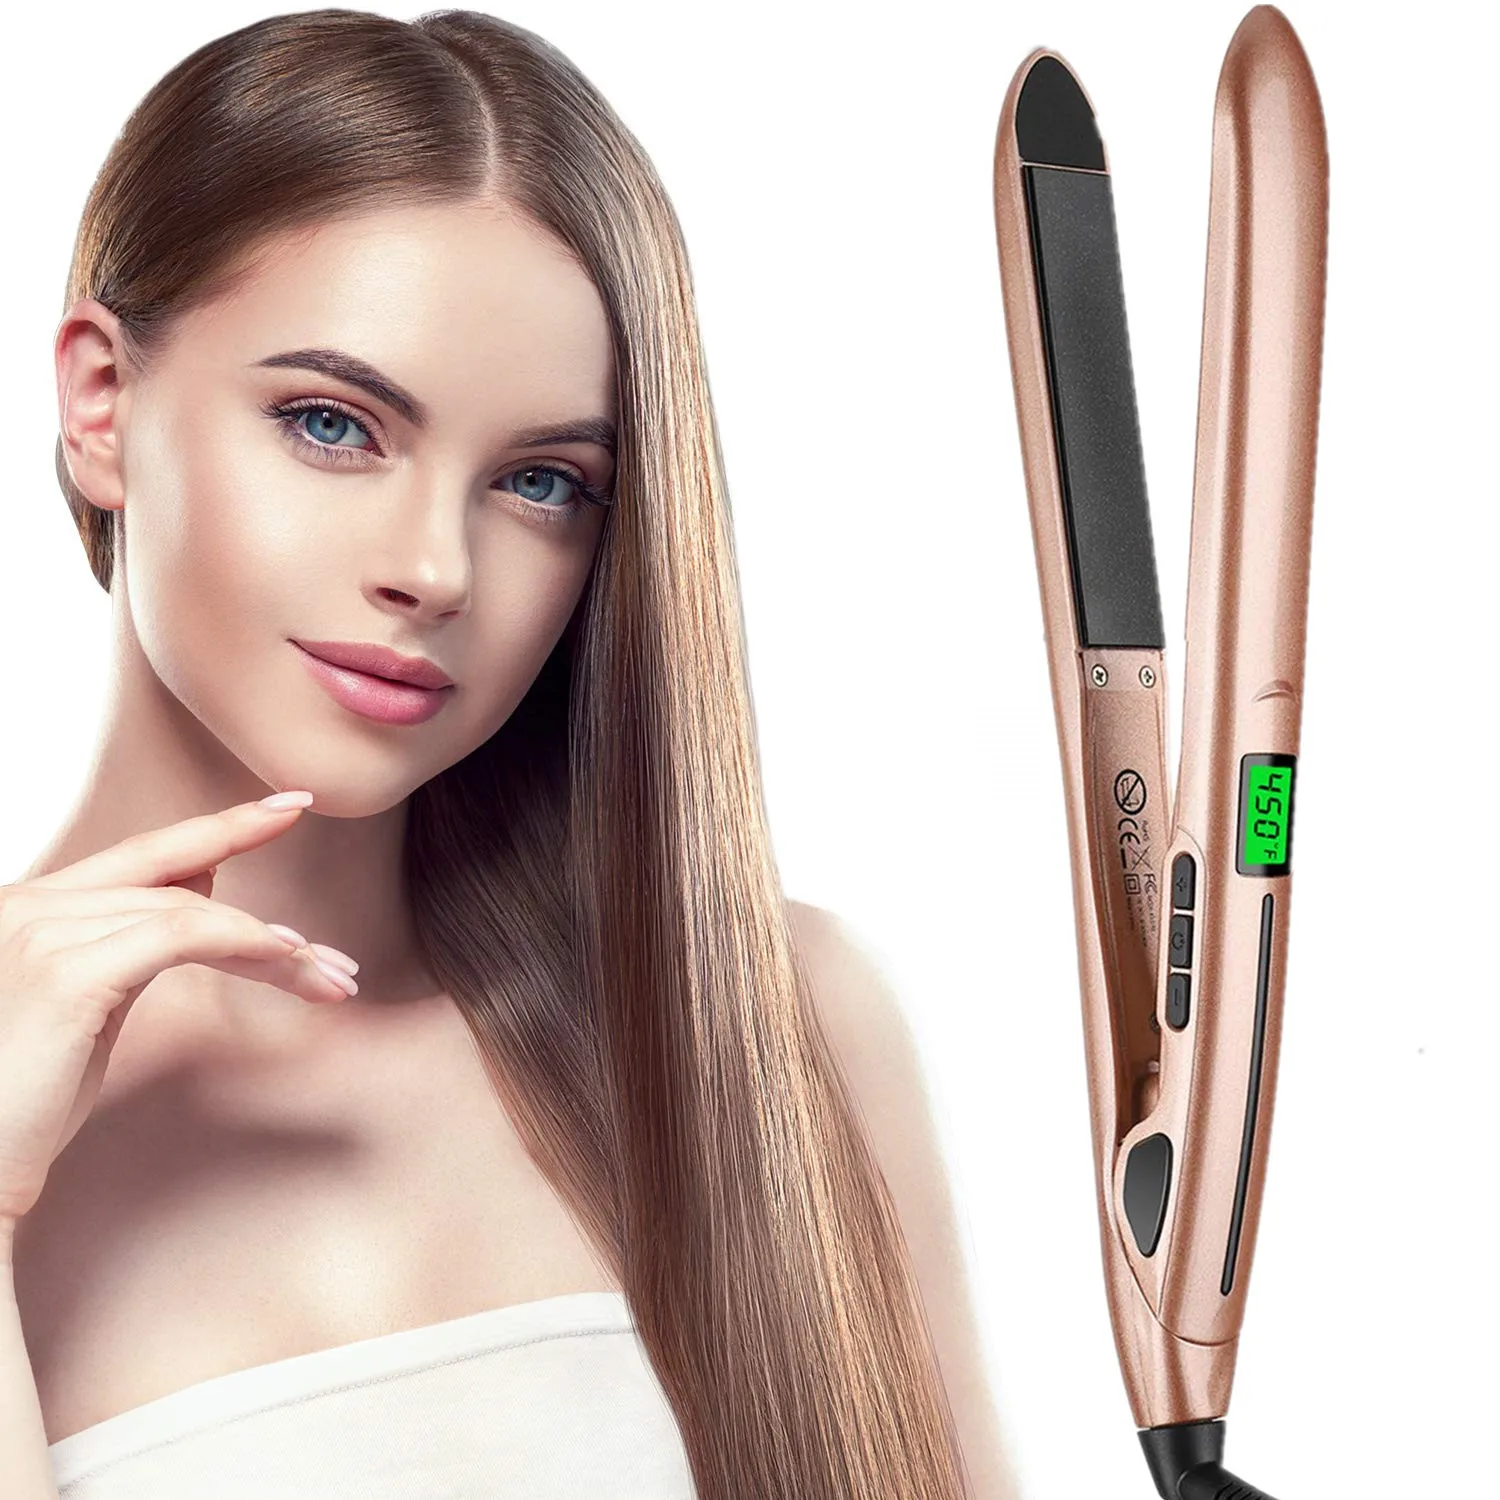 Professional Flat Iron Hair Straightener With Digital Lcd Display Heating Curling Straighteners Straightening Styling Hair Plate laboratory digital display multiple position magnetic stirrer hot plate